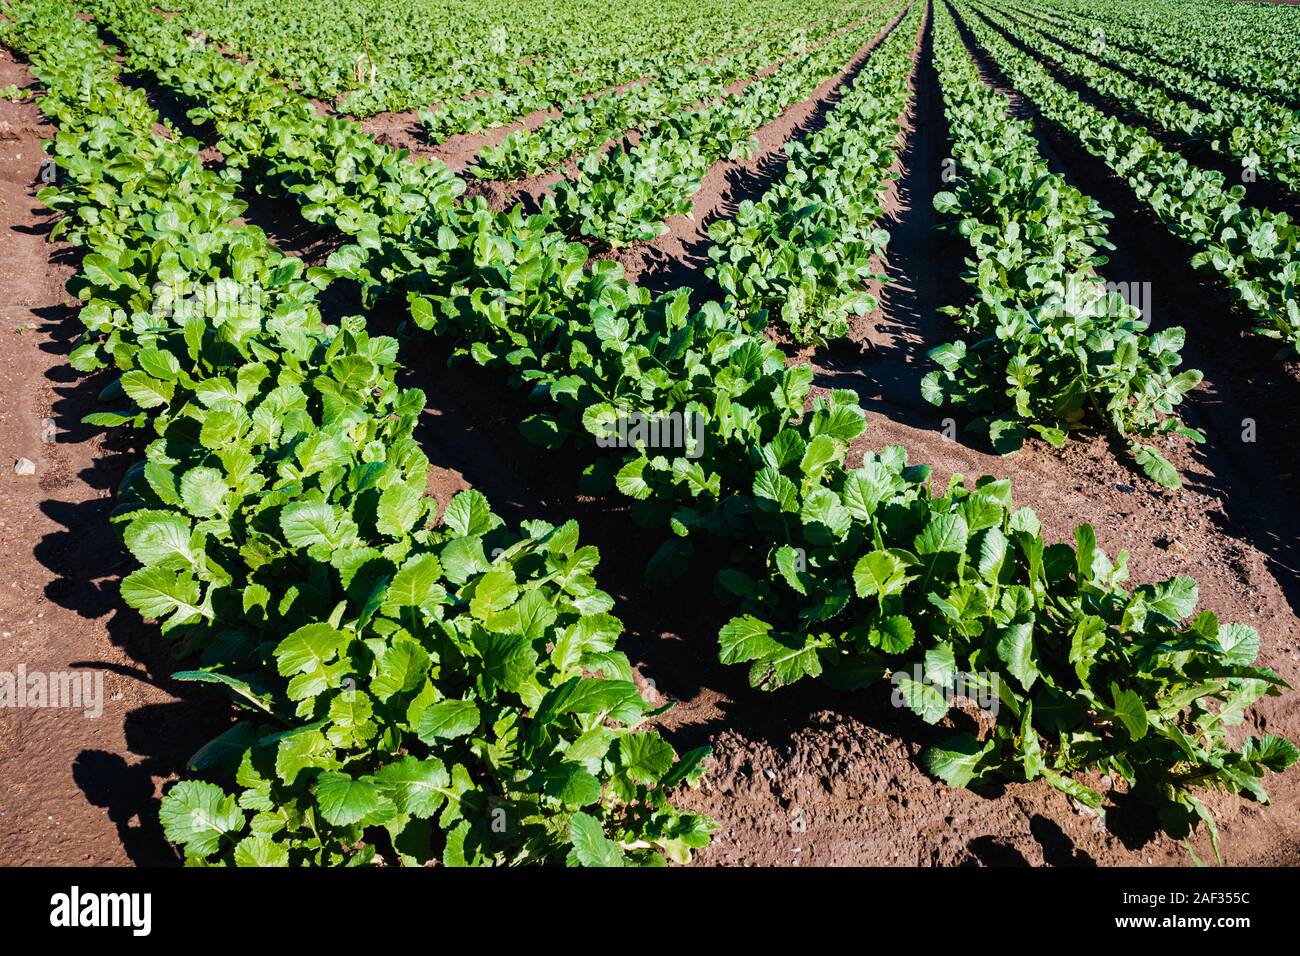 Rows of radish plants in an orchard at noon. Stock Photo